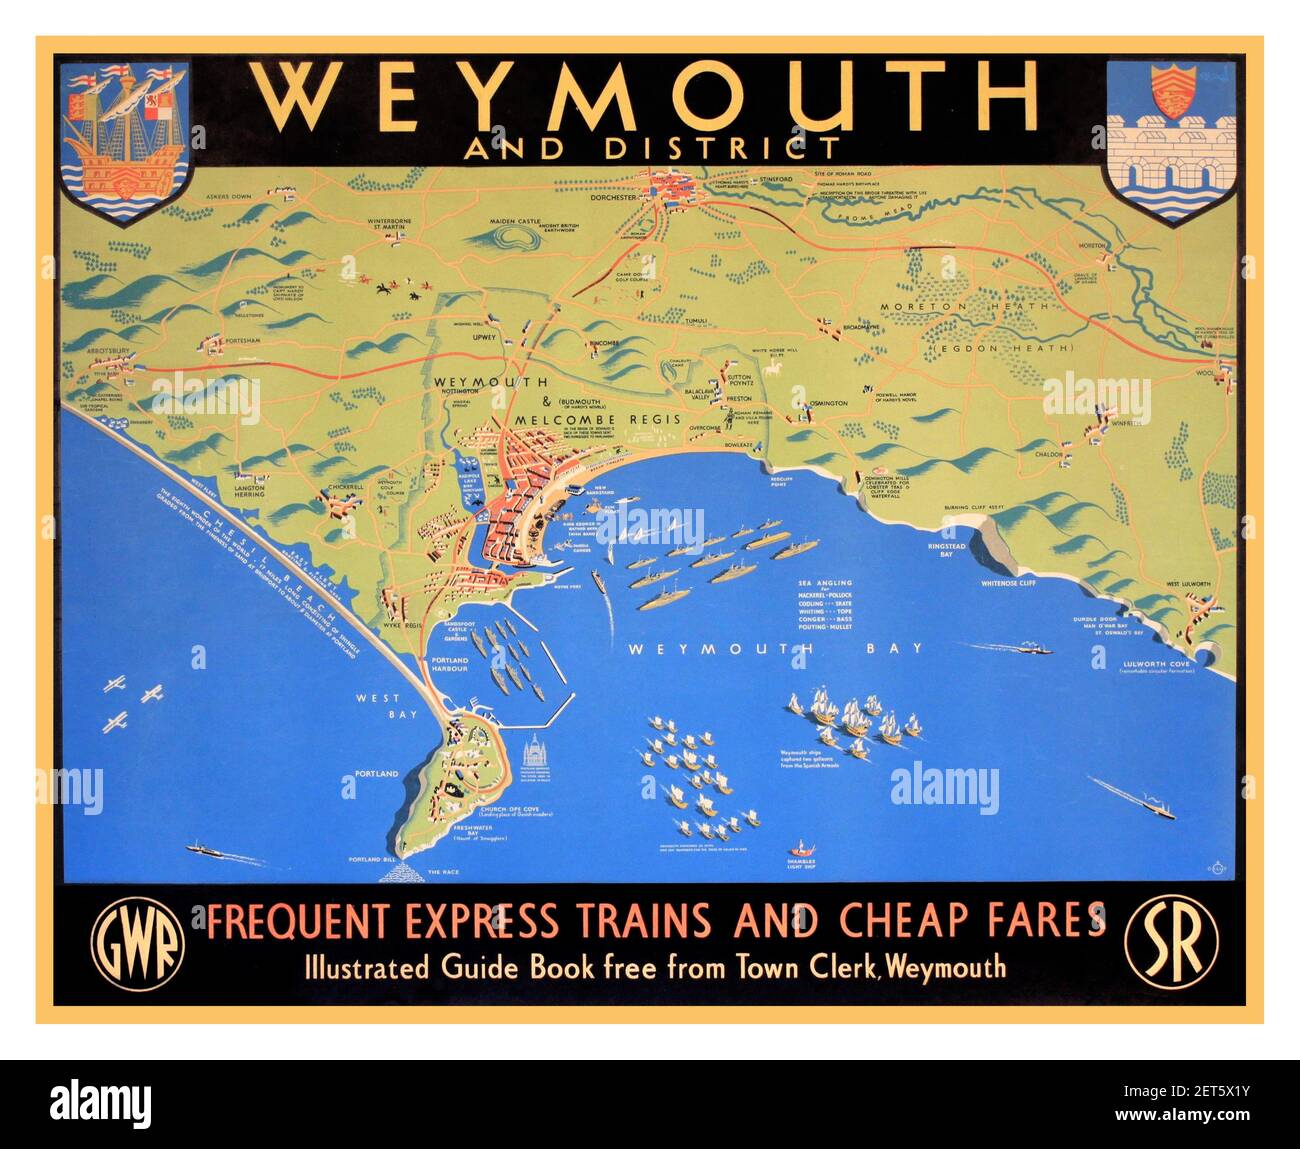 WEYMOUTH Vintage UK Travel Vacation Train Tour Poster Map Coastline 'Dilly's Weymouth and District, poster originale stampato per GWR e SR da Baynard 1947 Foto Stock